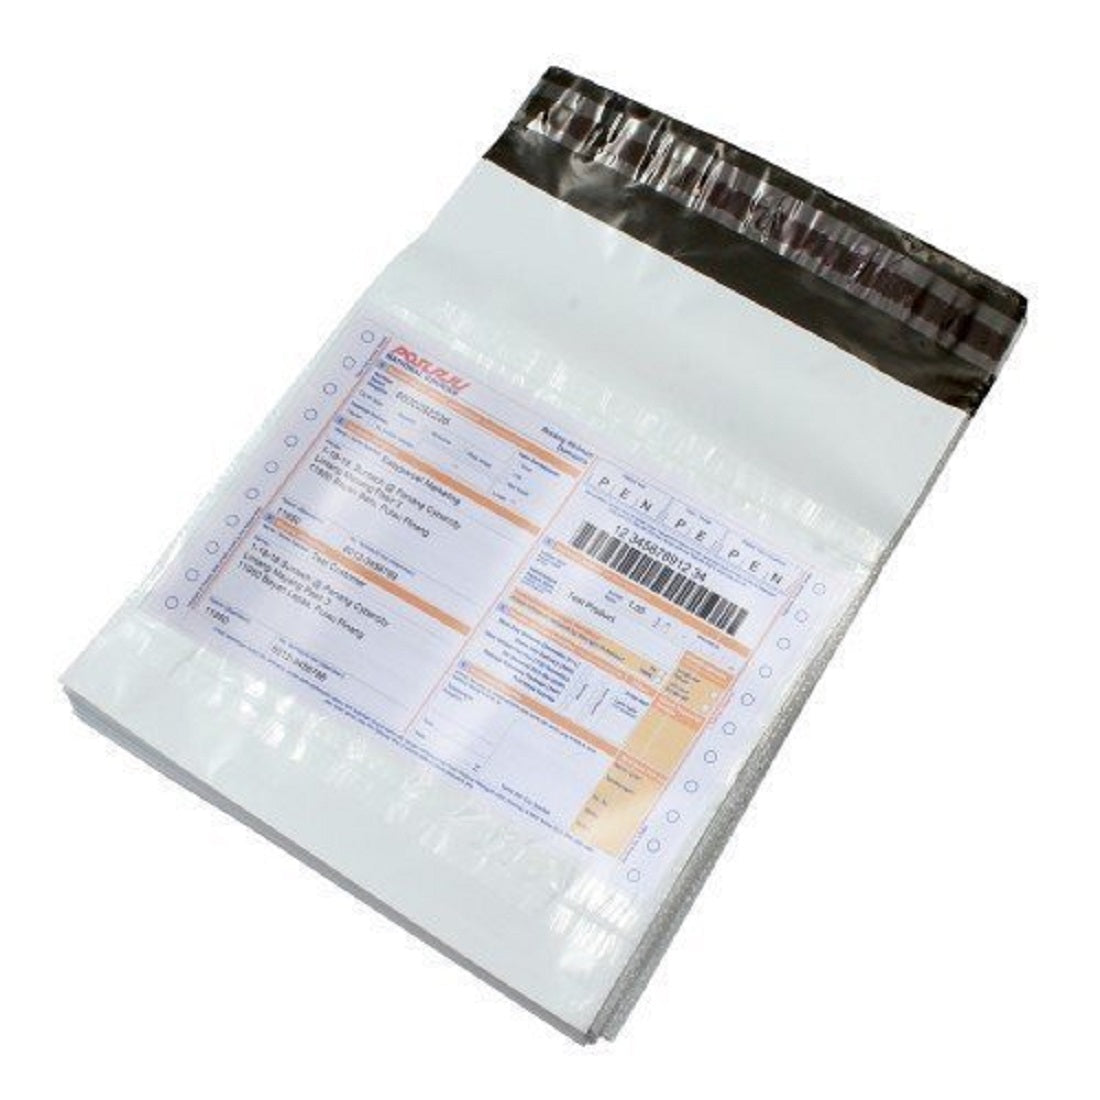 Courier Bags/Envelopes/Pouches/Cover 22x18 inches+ 2inch Flap  Pack of 50 Tamper Proof Plastic Polybags for Shipping/Packing (With POD)